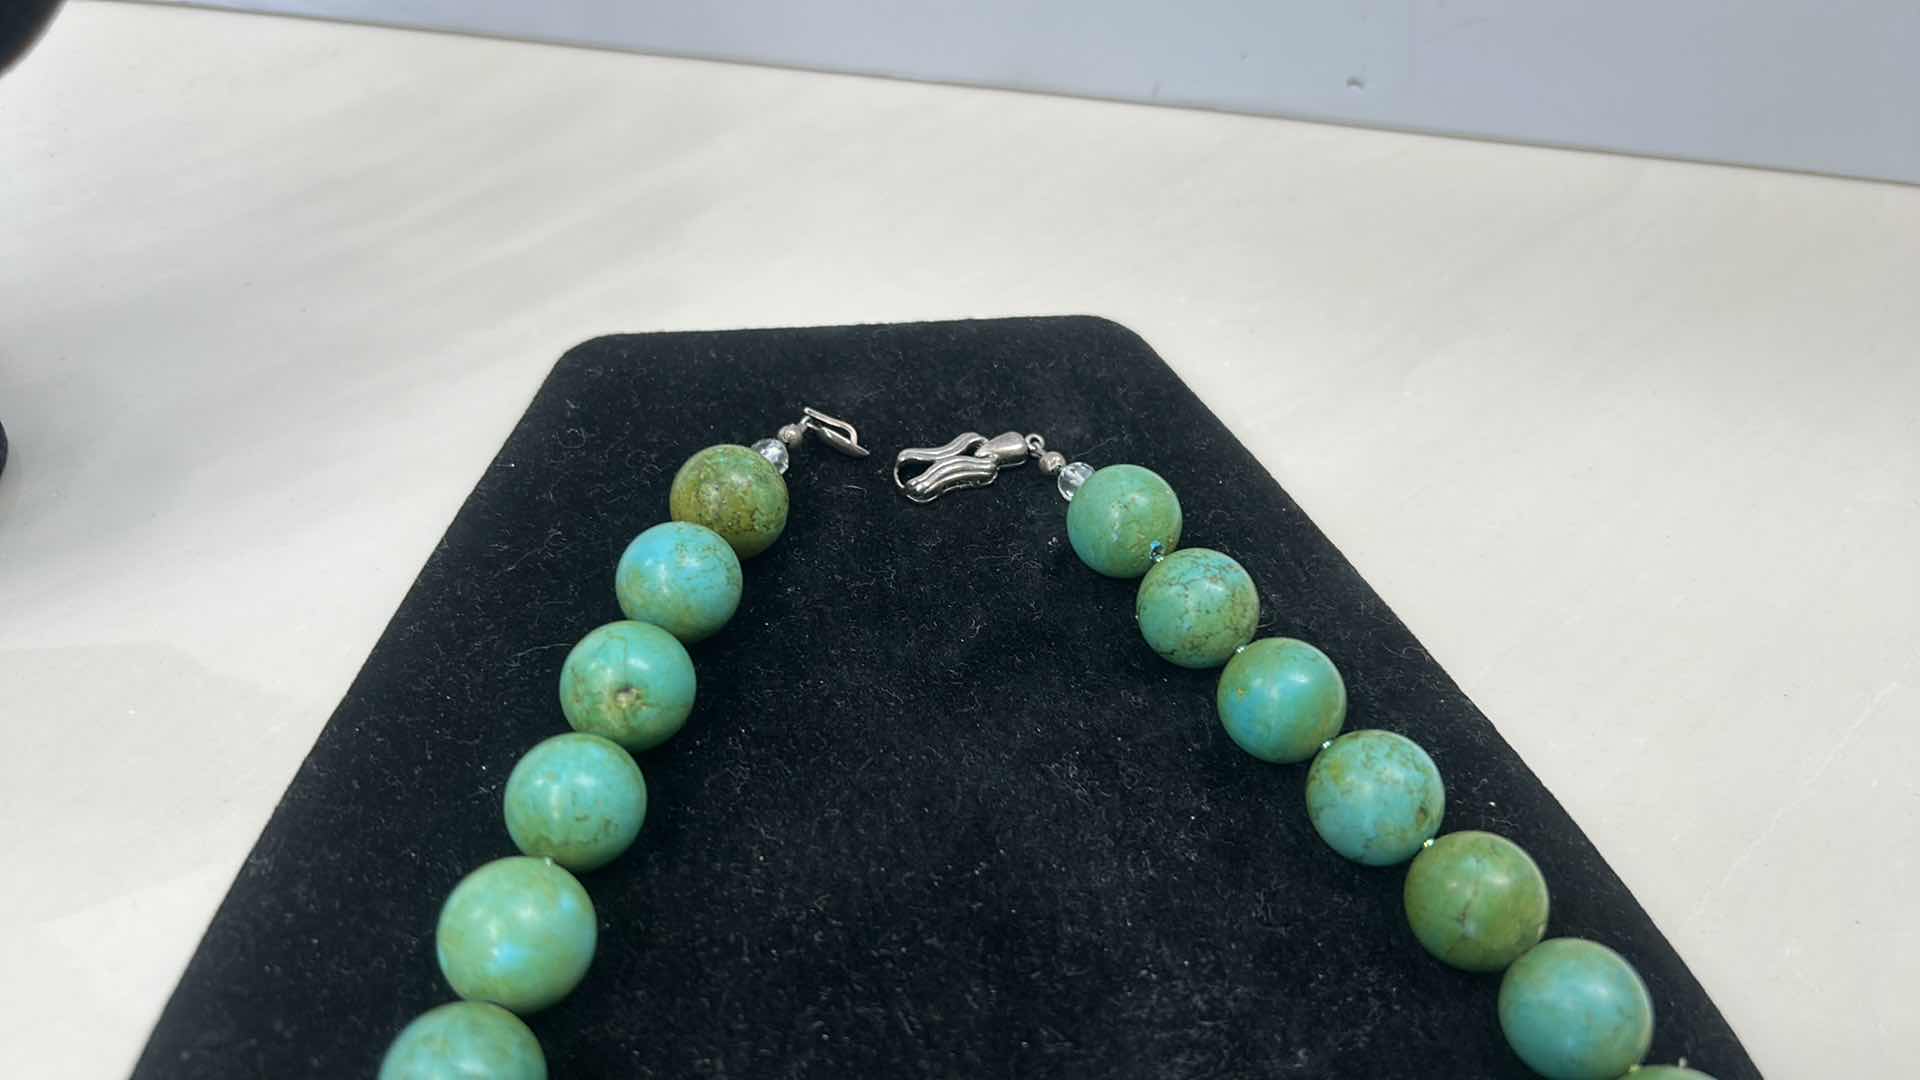 Photo 5 of STUNNING STONE NECKLACE, JADE MEASURES 2 1/4” x 3 1/4” ROUND 1/2” CHRYSOPRASE BEADS